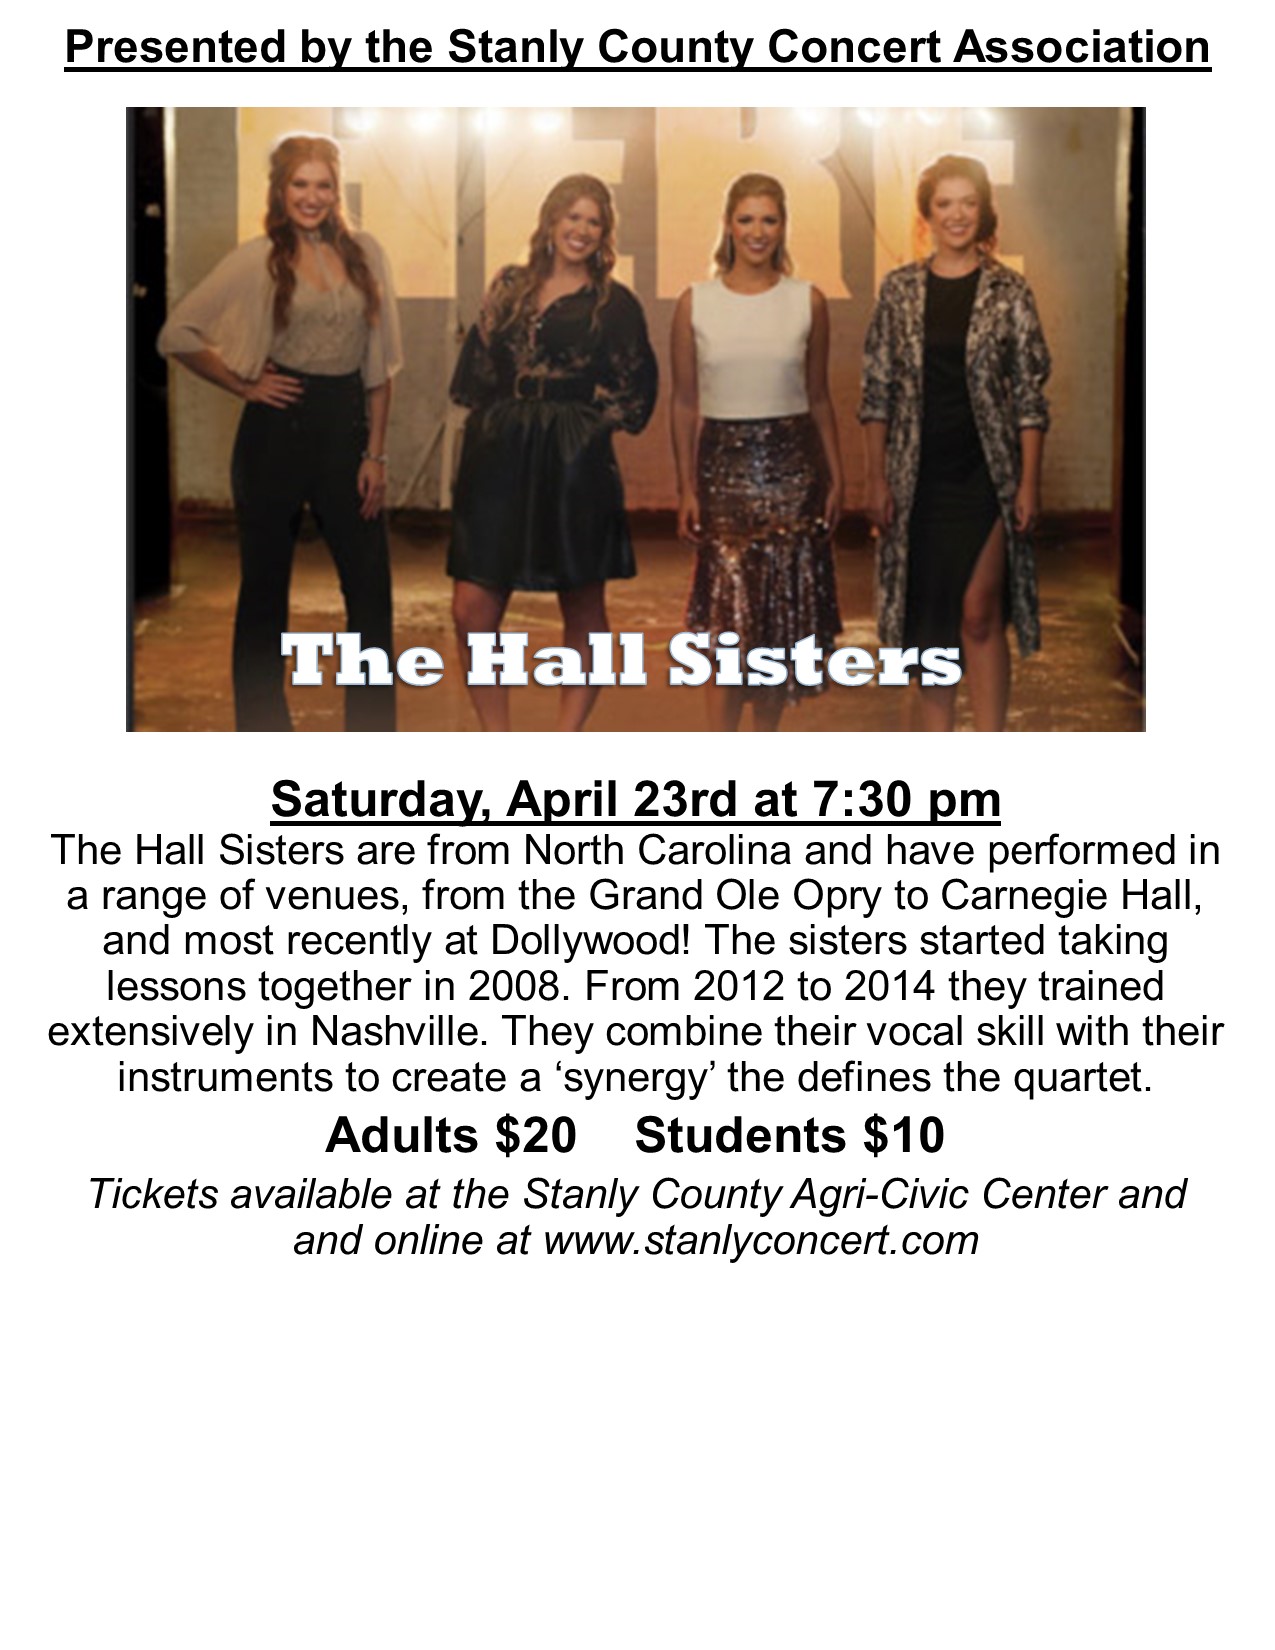 SCCA Presents The Hall Sisters